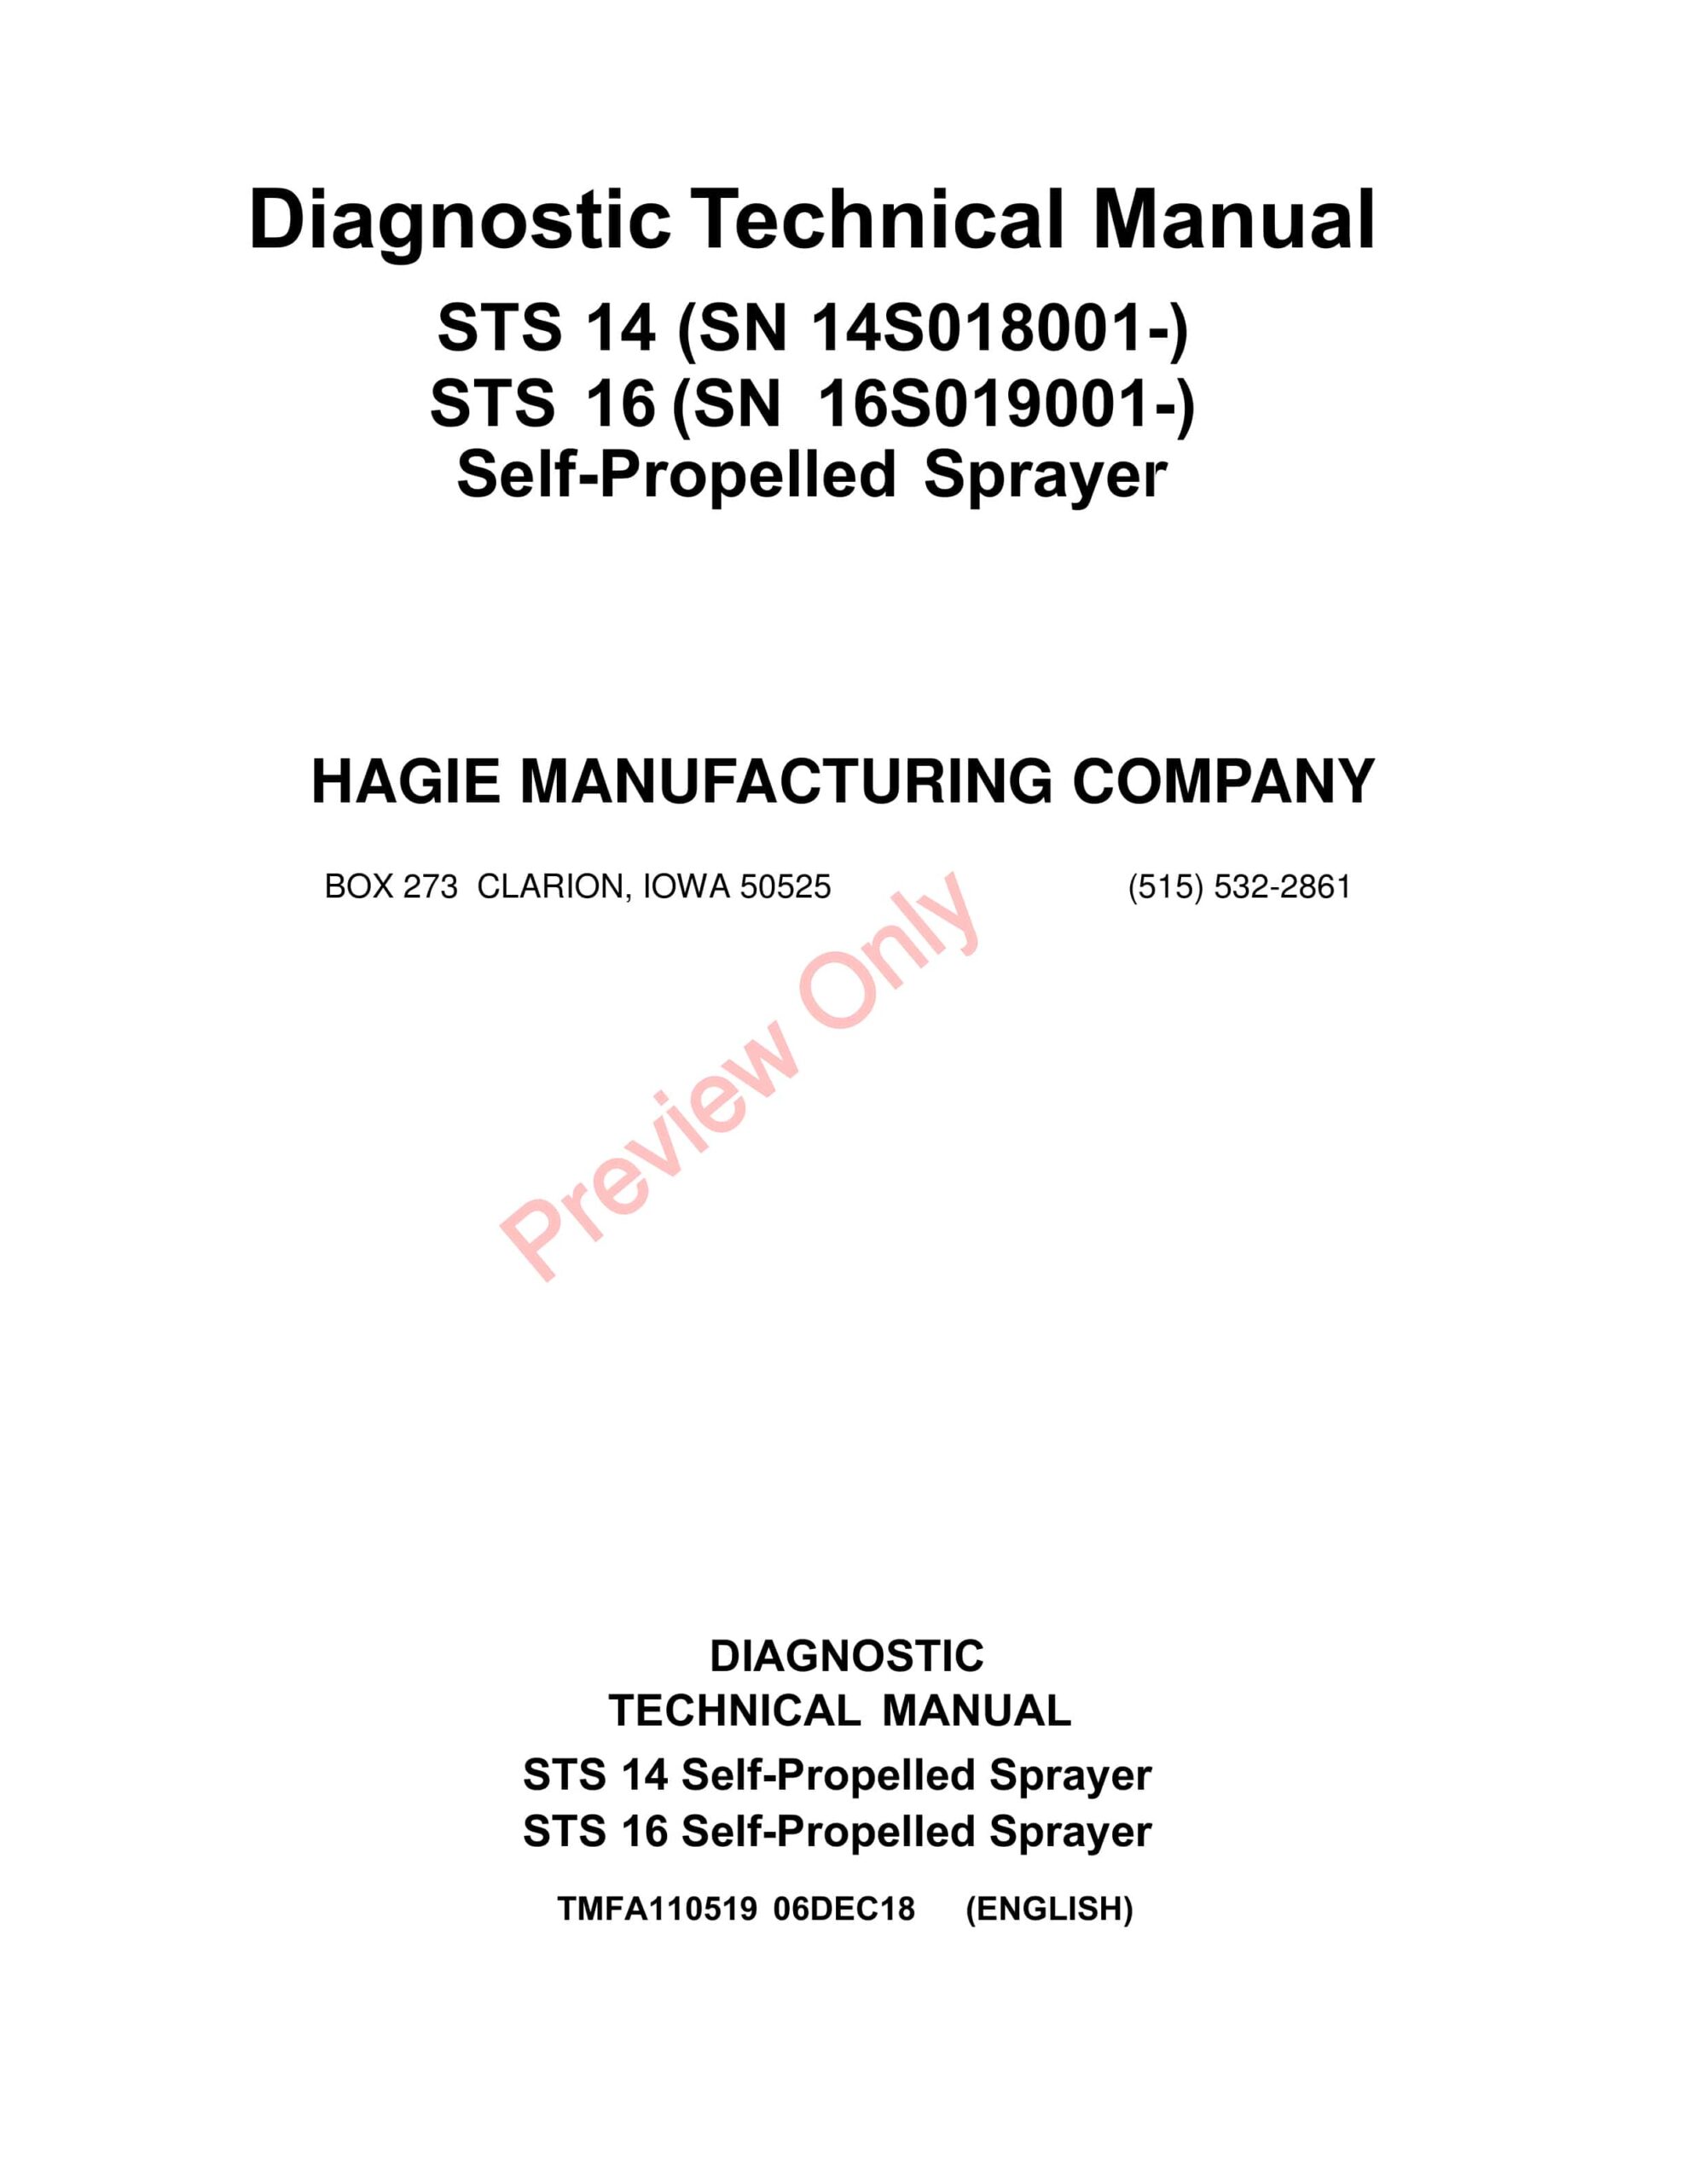 John Deere STS14 and STS16 Self-Propelled Sprayers Diagnostic Technical Manual TMFA110519 06DEC18-1